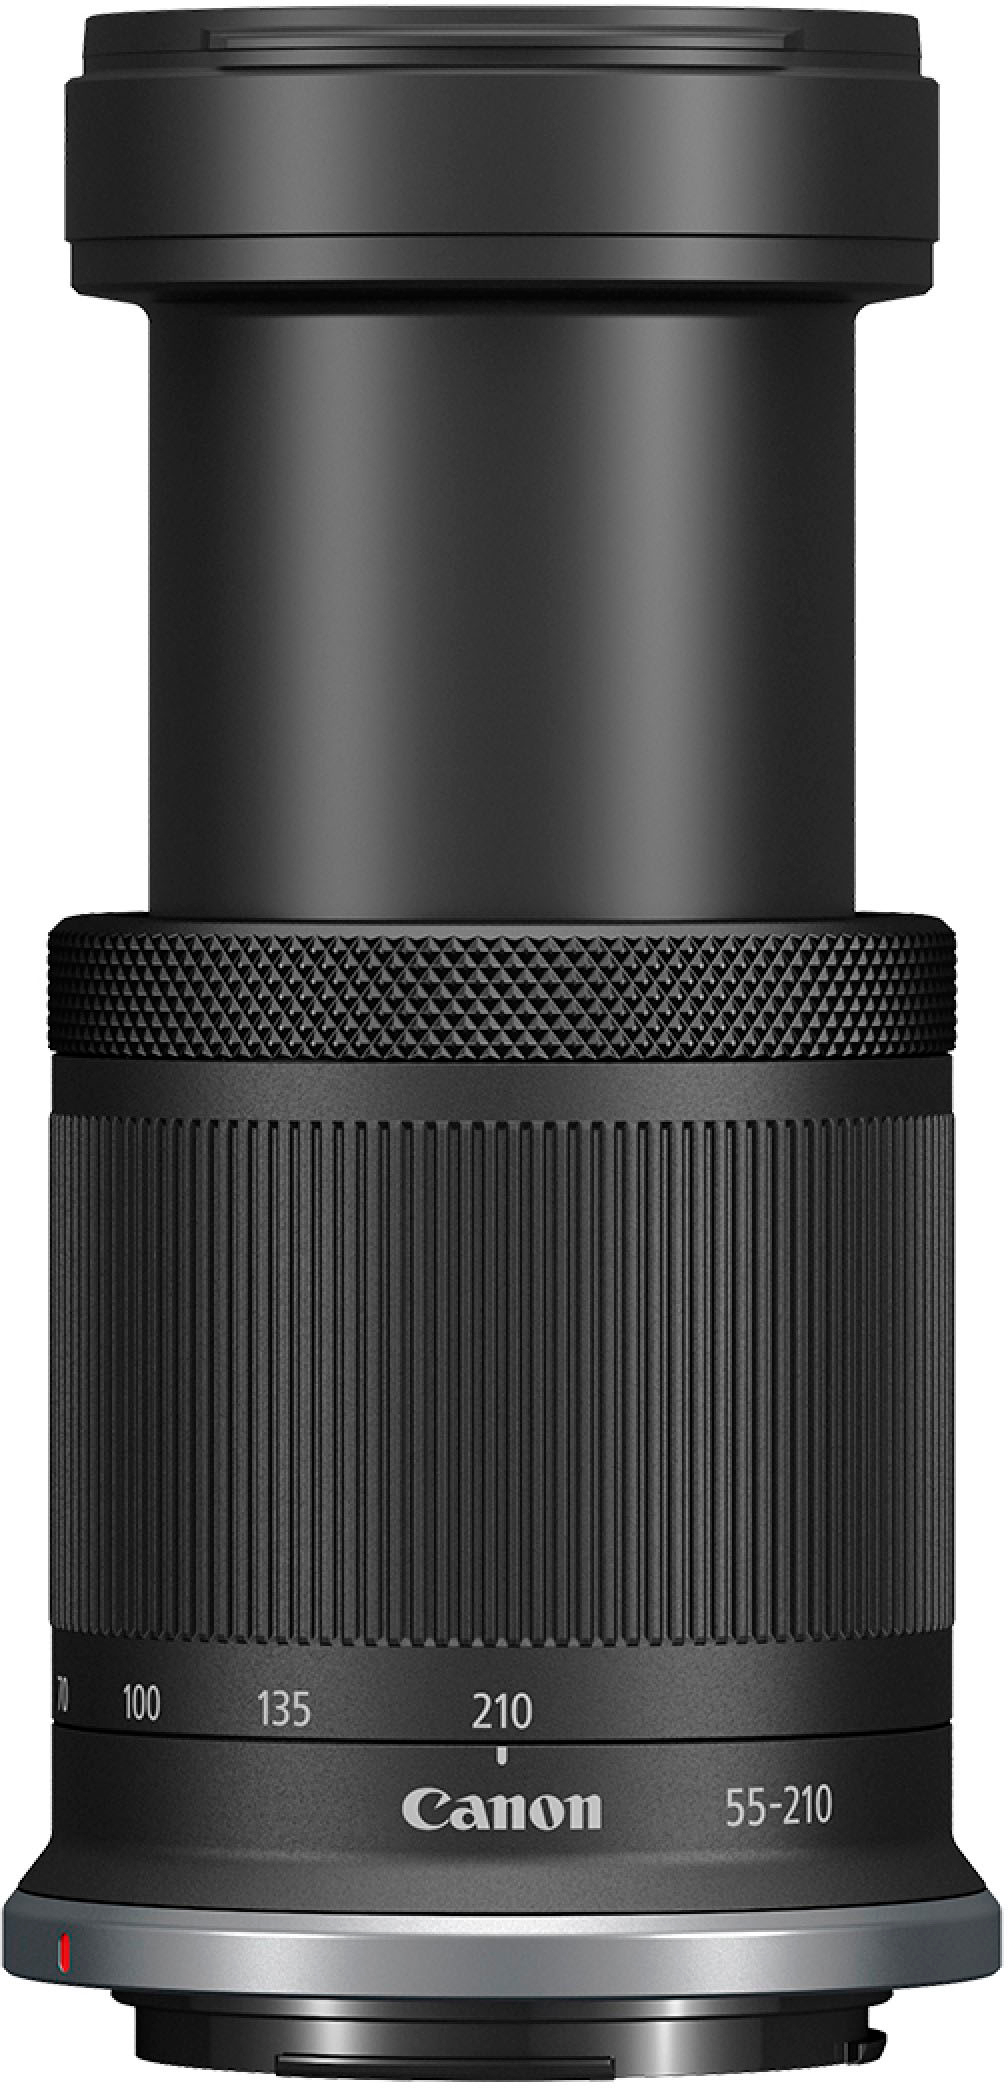 Back View: Sigma - 60-600mm f/4.5-6.3 DG OS HSM Optical Telephoto Zoom Lens for Canon EF - Black